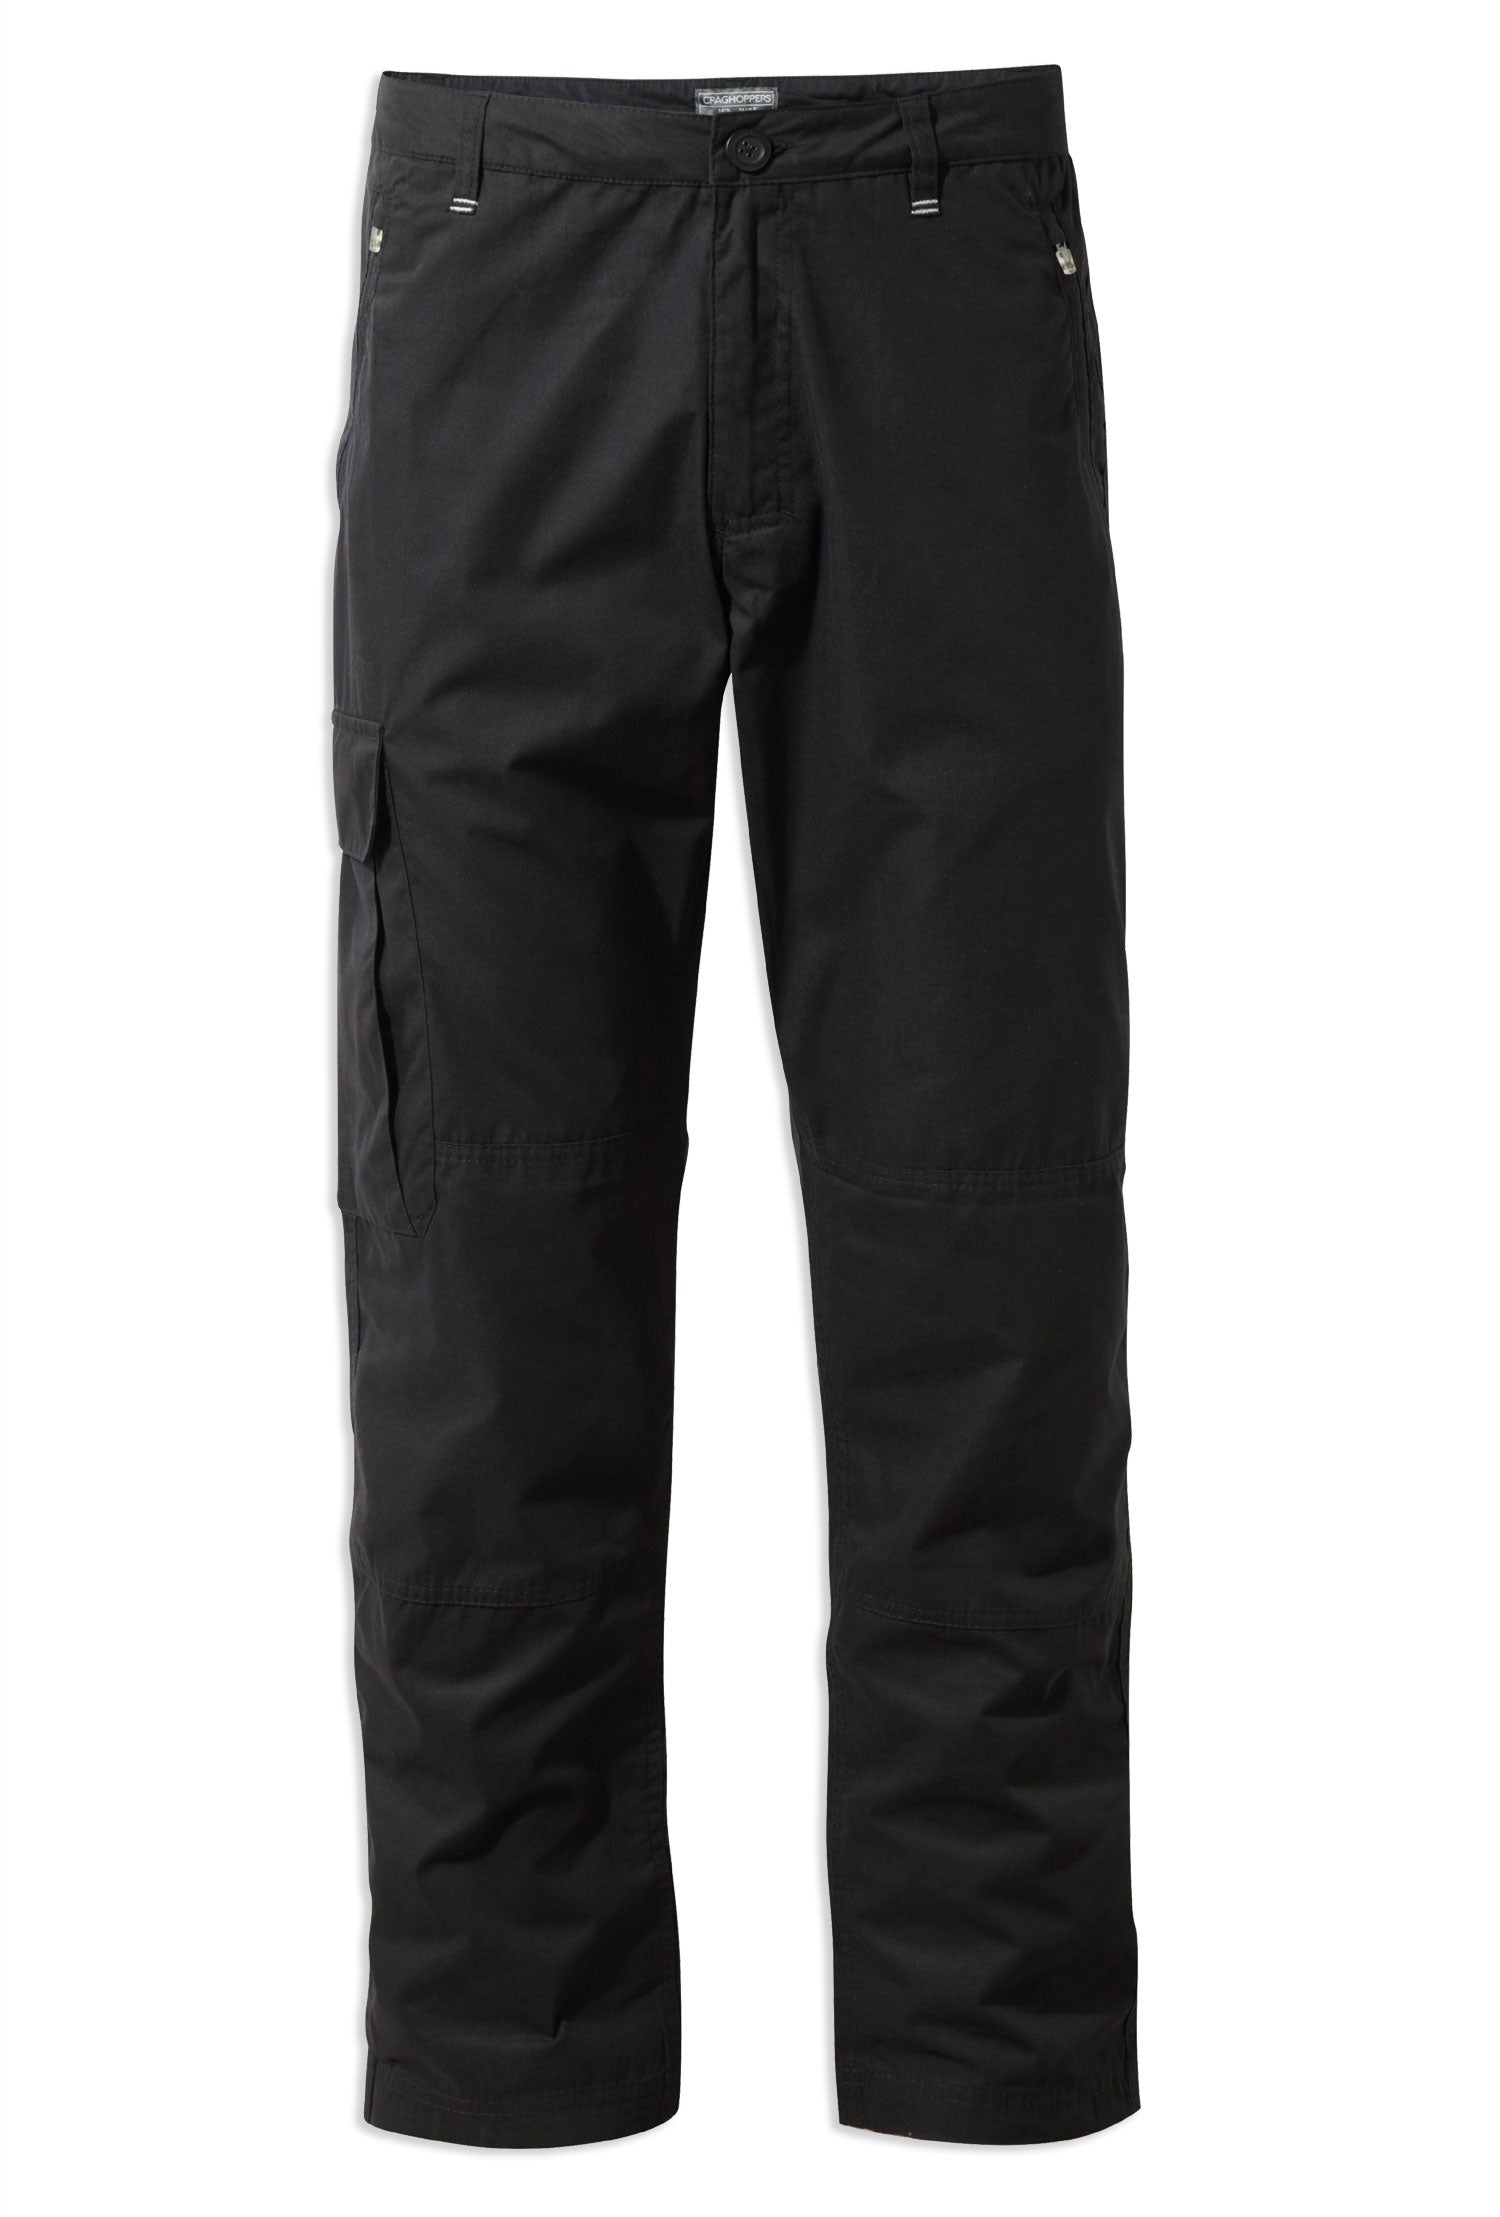 Craghoppers Traverse Trousers | Black